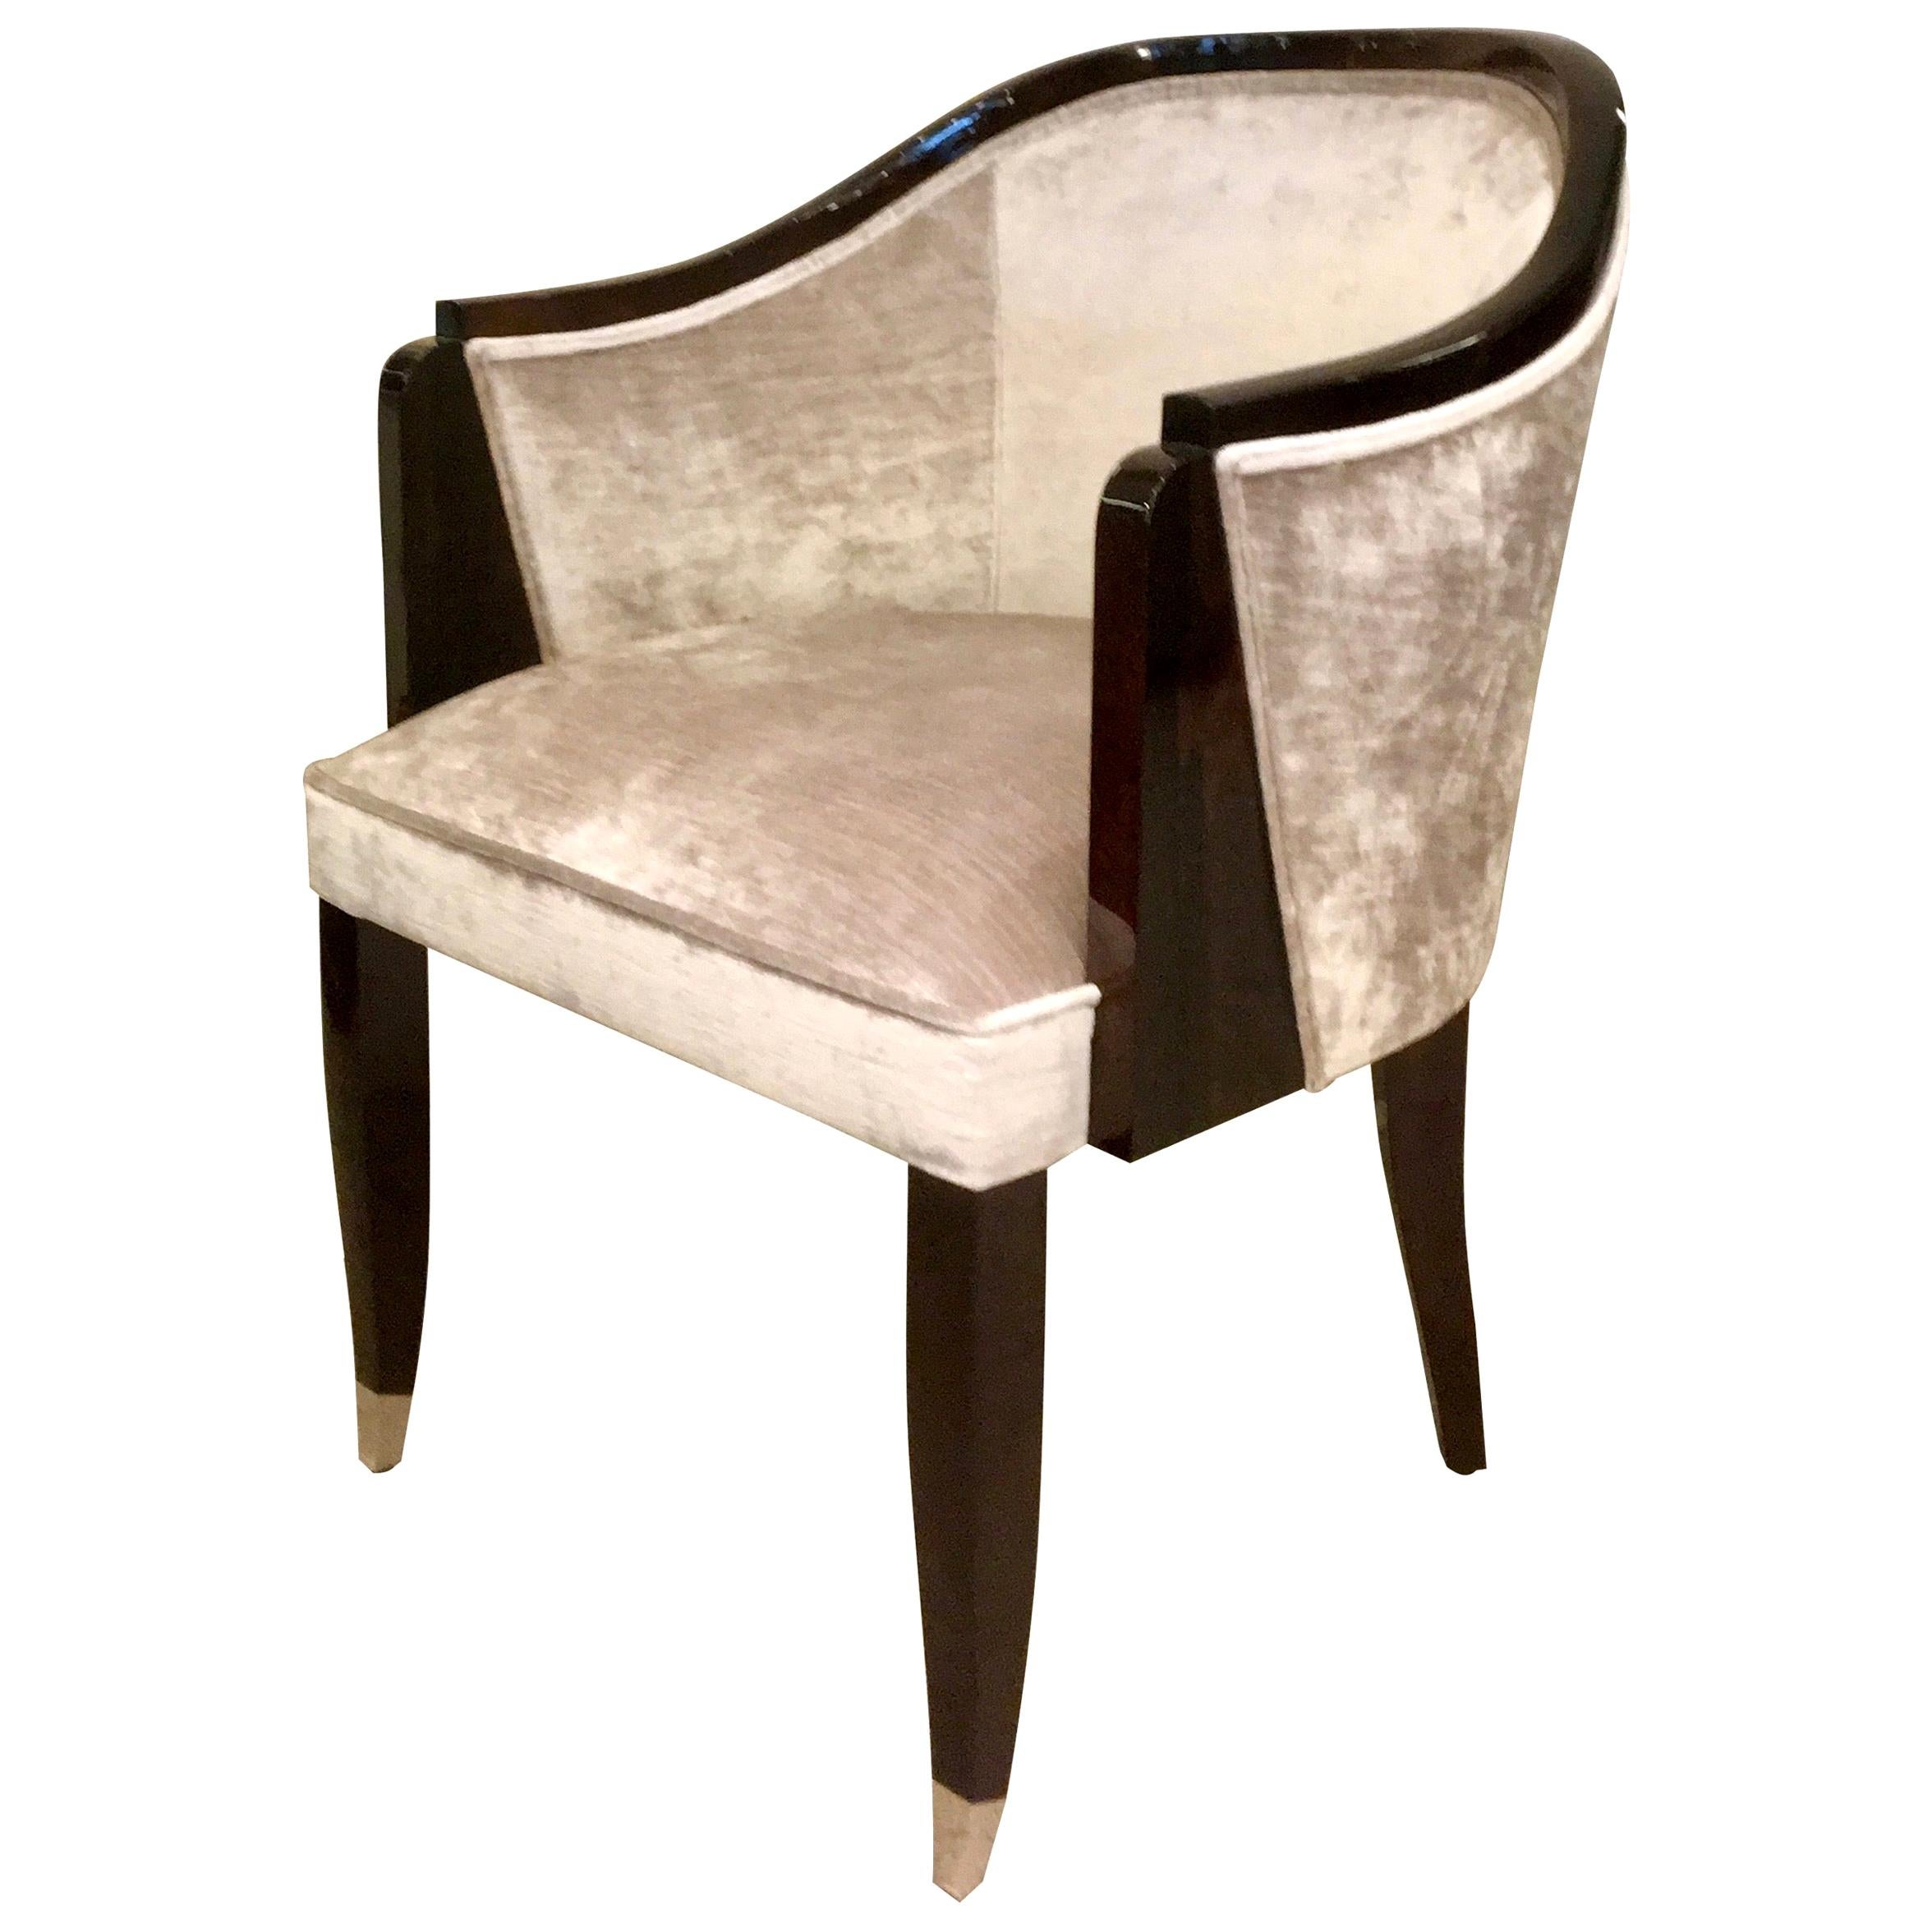 Comfortable Art Deco Style Shell Chair with Fabric Upholstery and Lacquered Wood For Sale